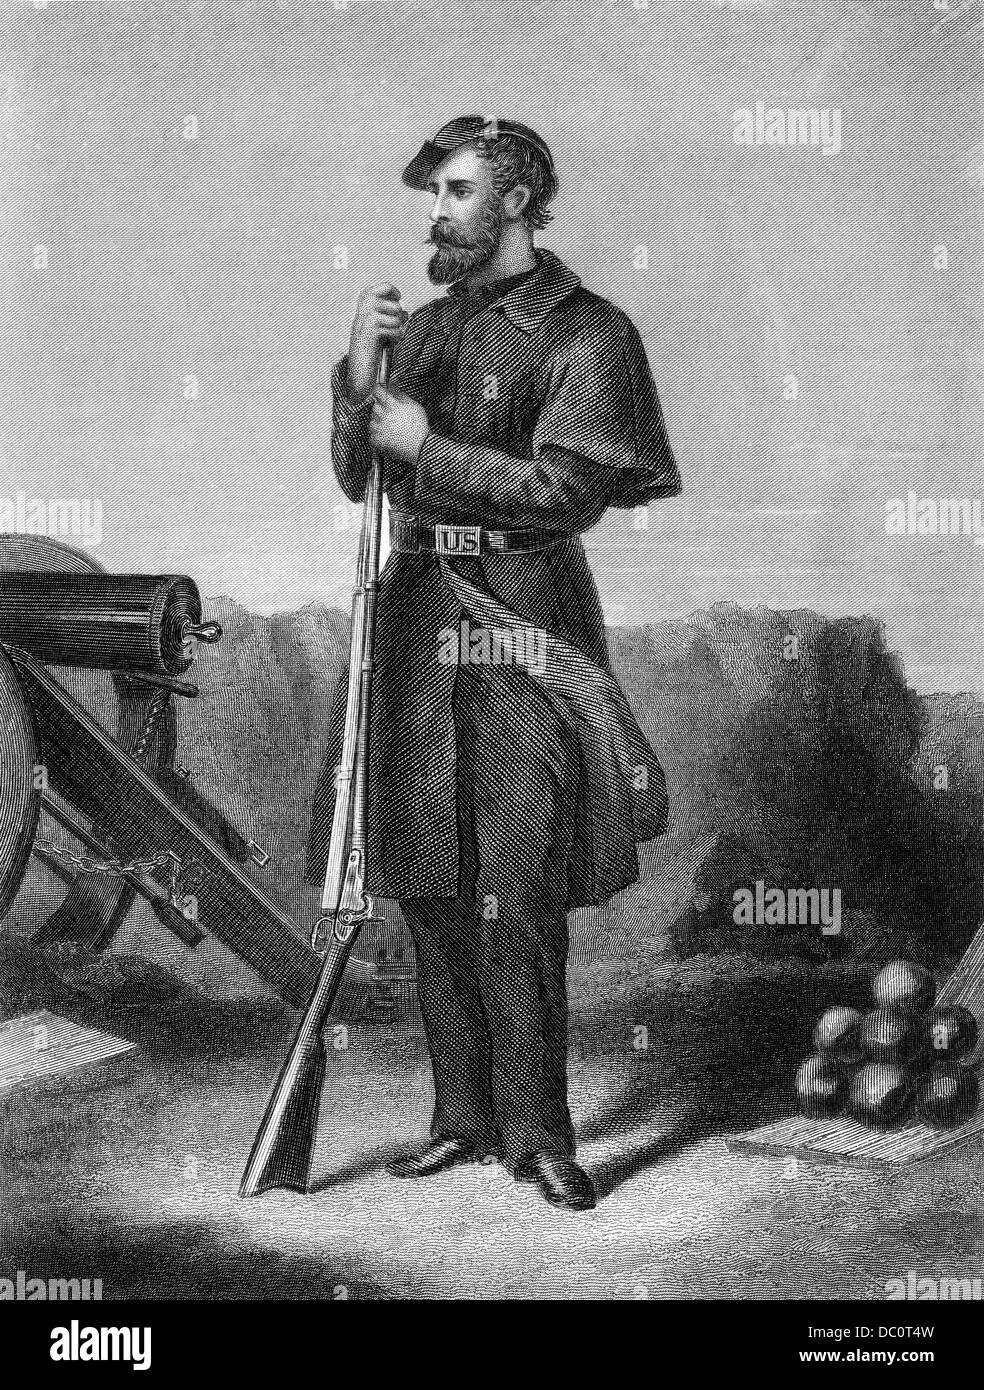 1800s 1860s STANDING PORTRAIT OF A UNION VOLUNTEER SOLDIER IN UNIFORM BY CANNON HOLDING RIFLE Stock Photo